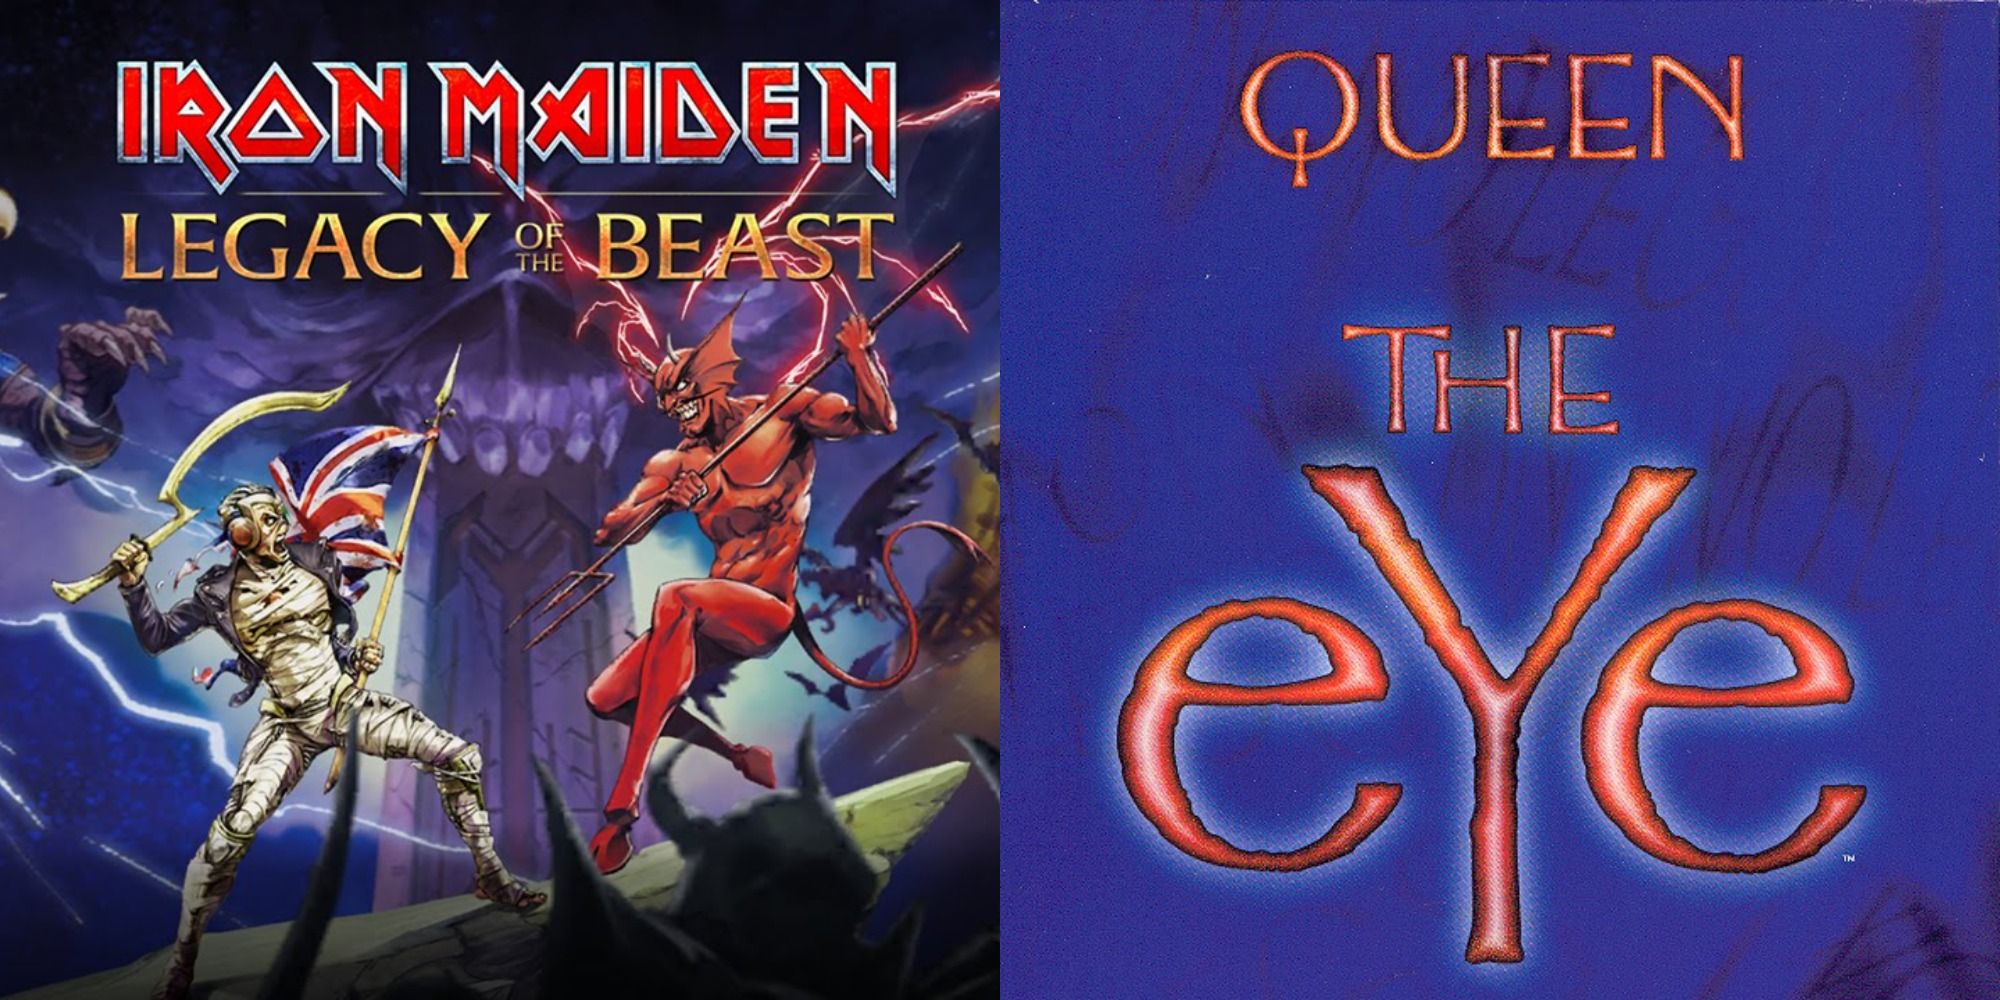 Split image showing covers for the games Iron Maiden Legacy of the Beast and Queen: The eYe